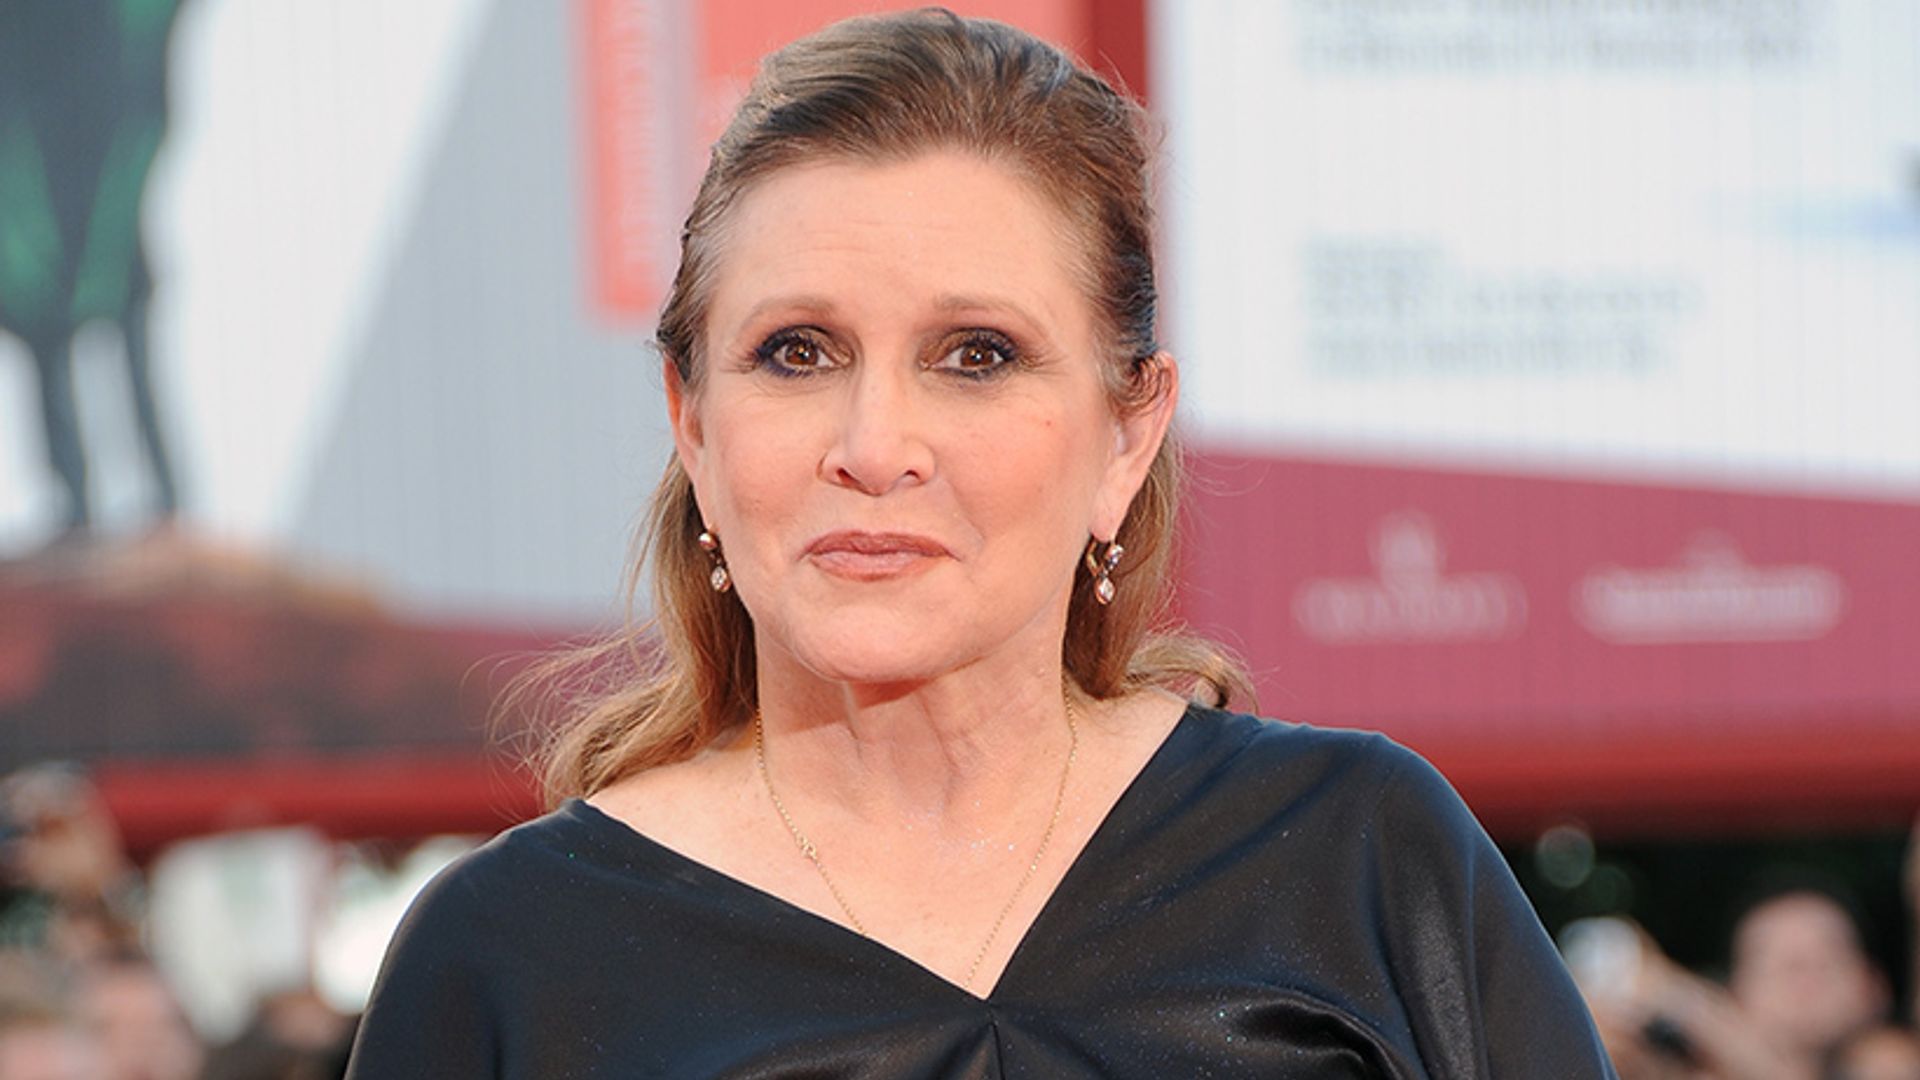 Carrie Fisher had drugs in her system when she died; daughter releases emotional statement